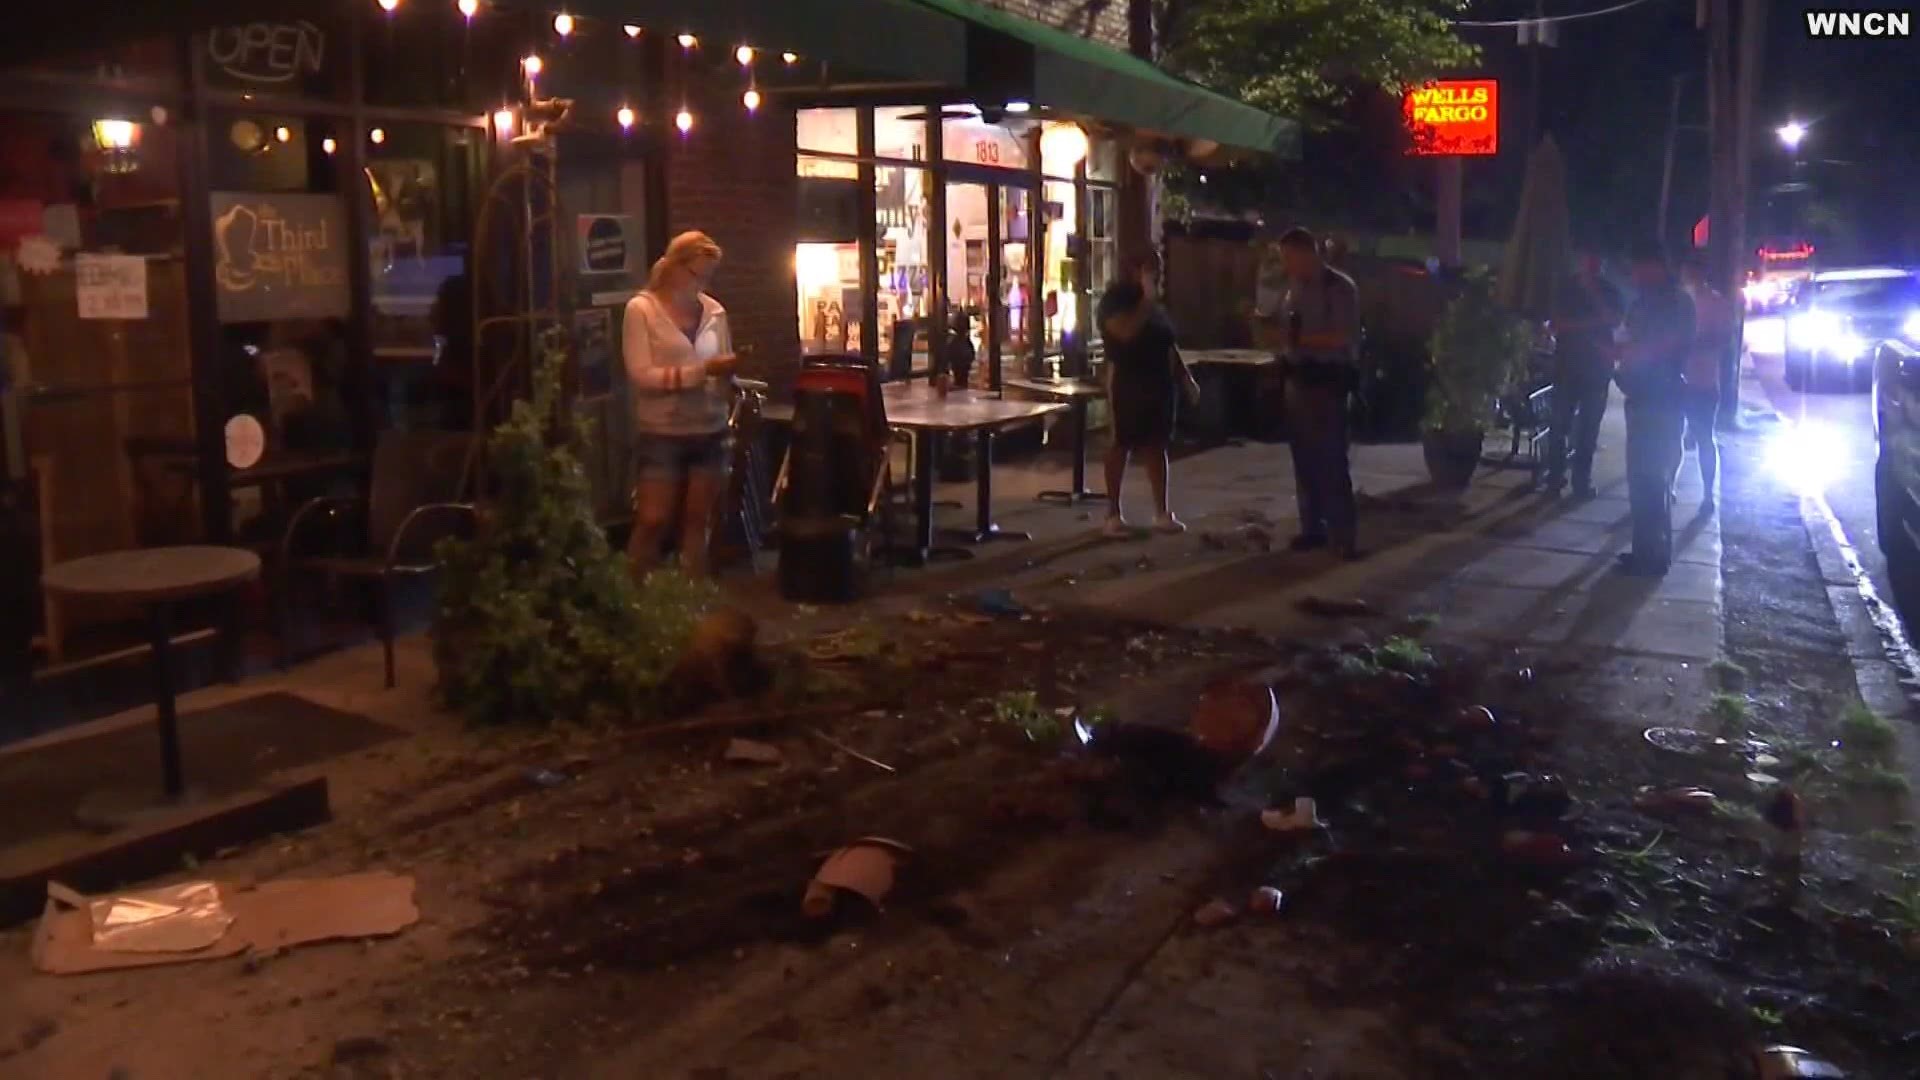 The car went onto the sidewalk and hit outdoor seating at the patio in front of Lilly’s Pizza.